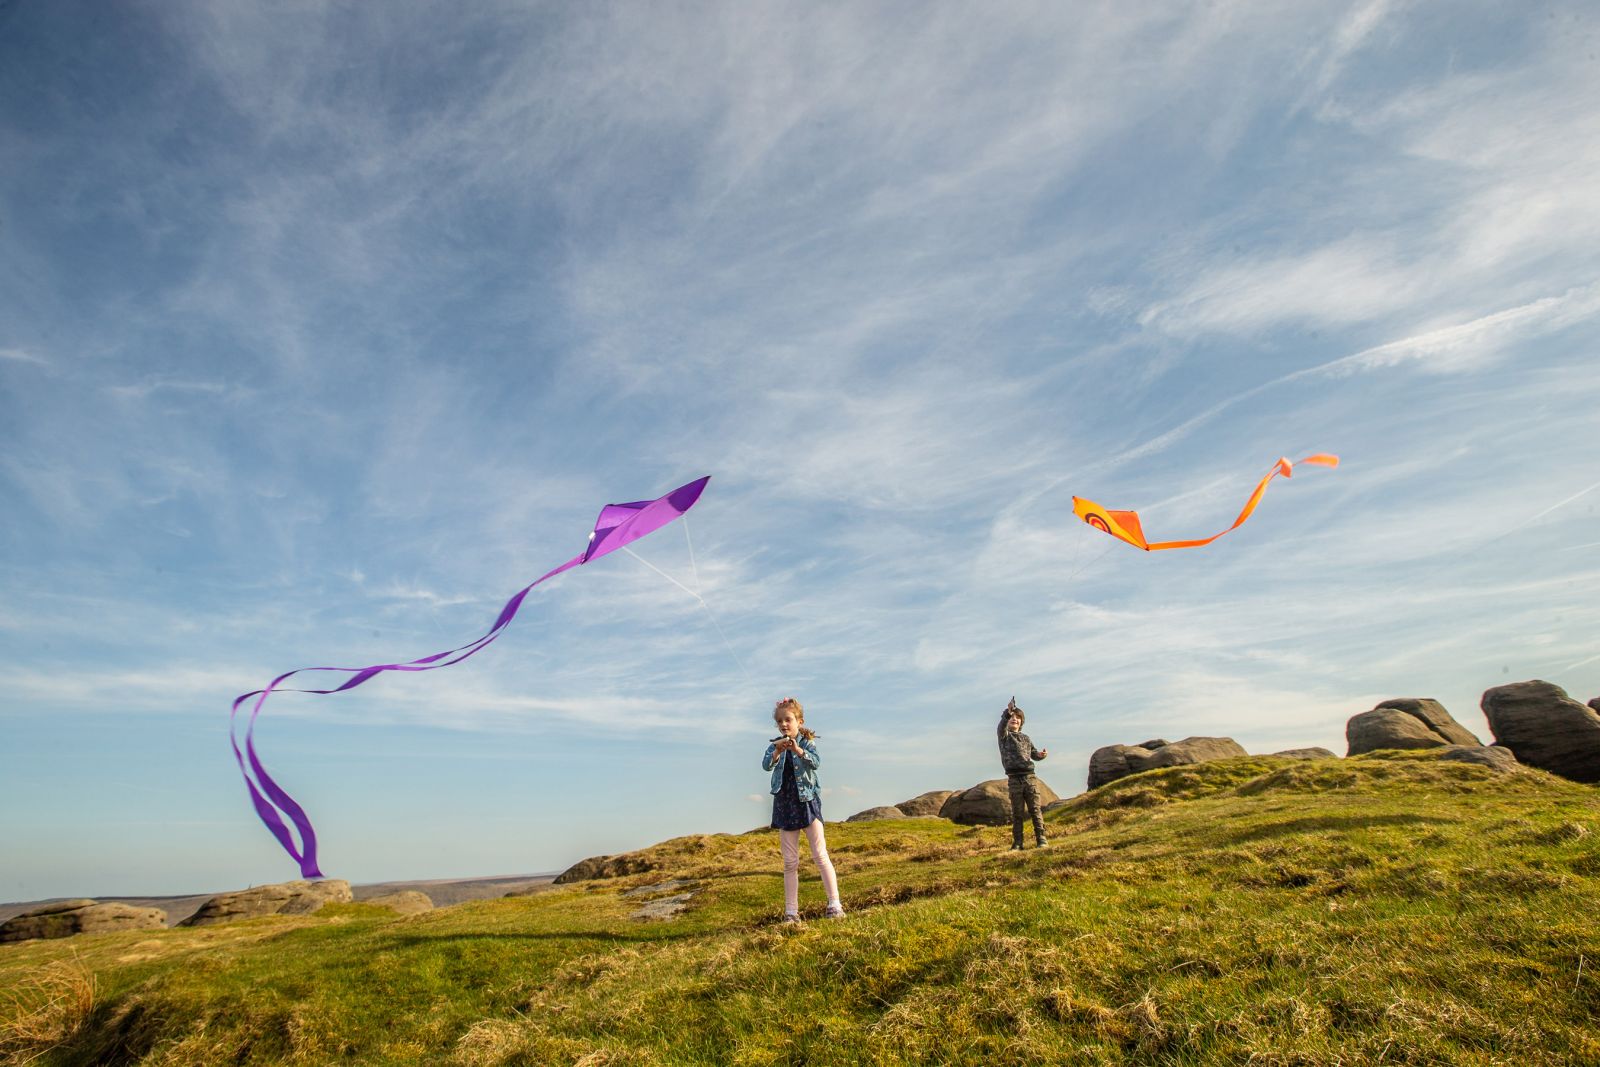 Kite festival in the South Pennines